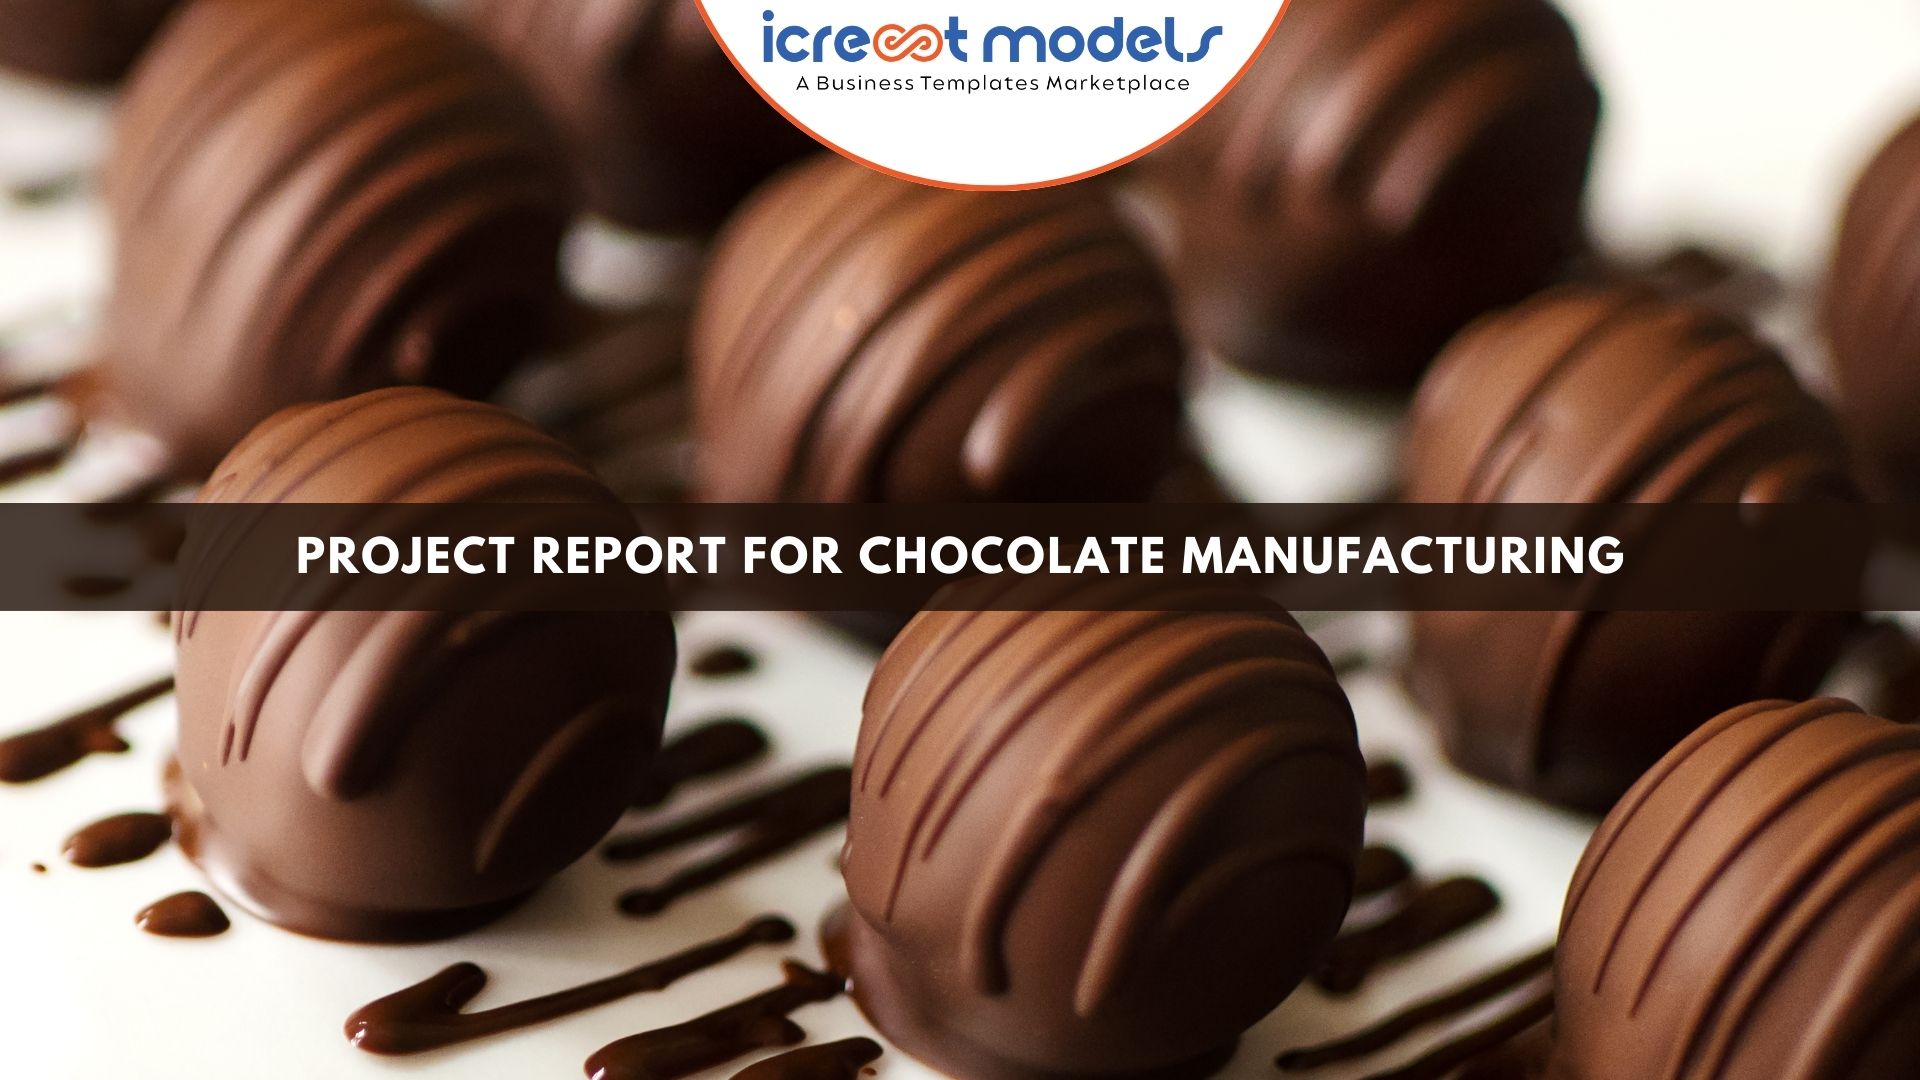 PROJECT REPORT FOR CHOCOLATE MANUFACTURING